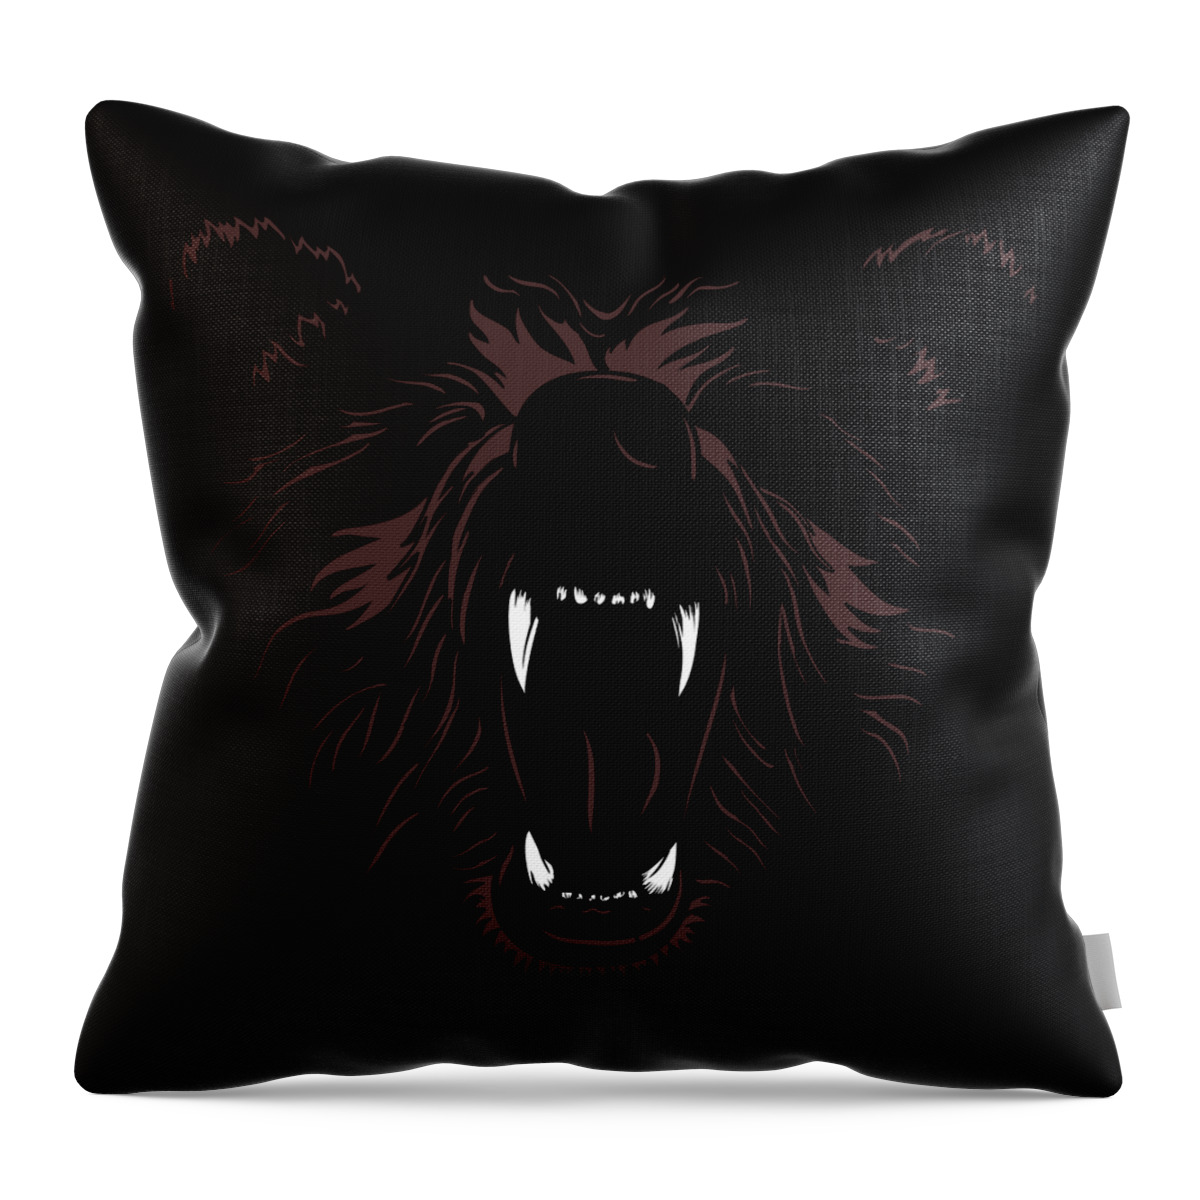 Colorful Throw Pillow featuring the digital art Grizzly Bear by Jacob Zelazny